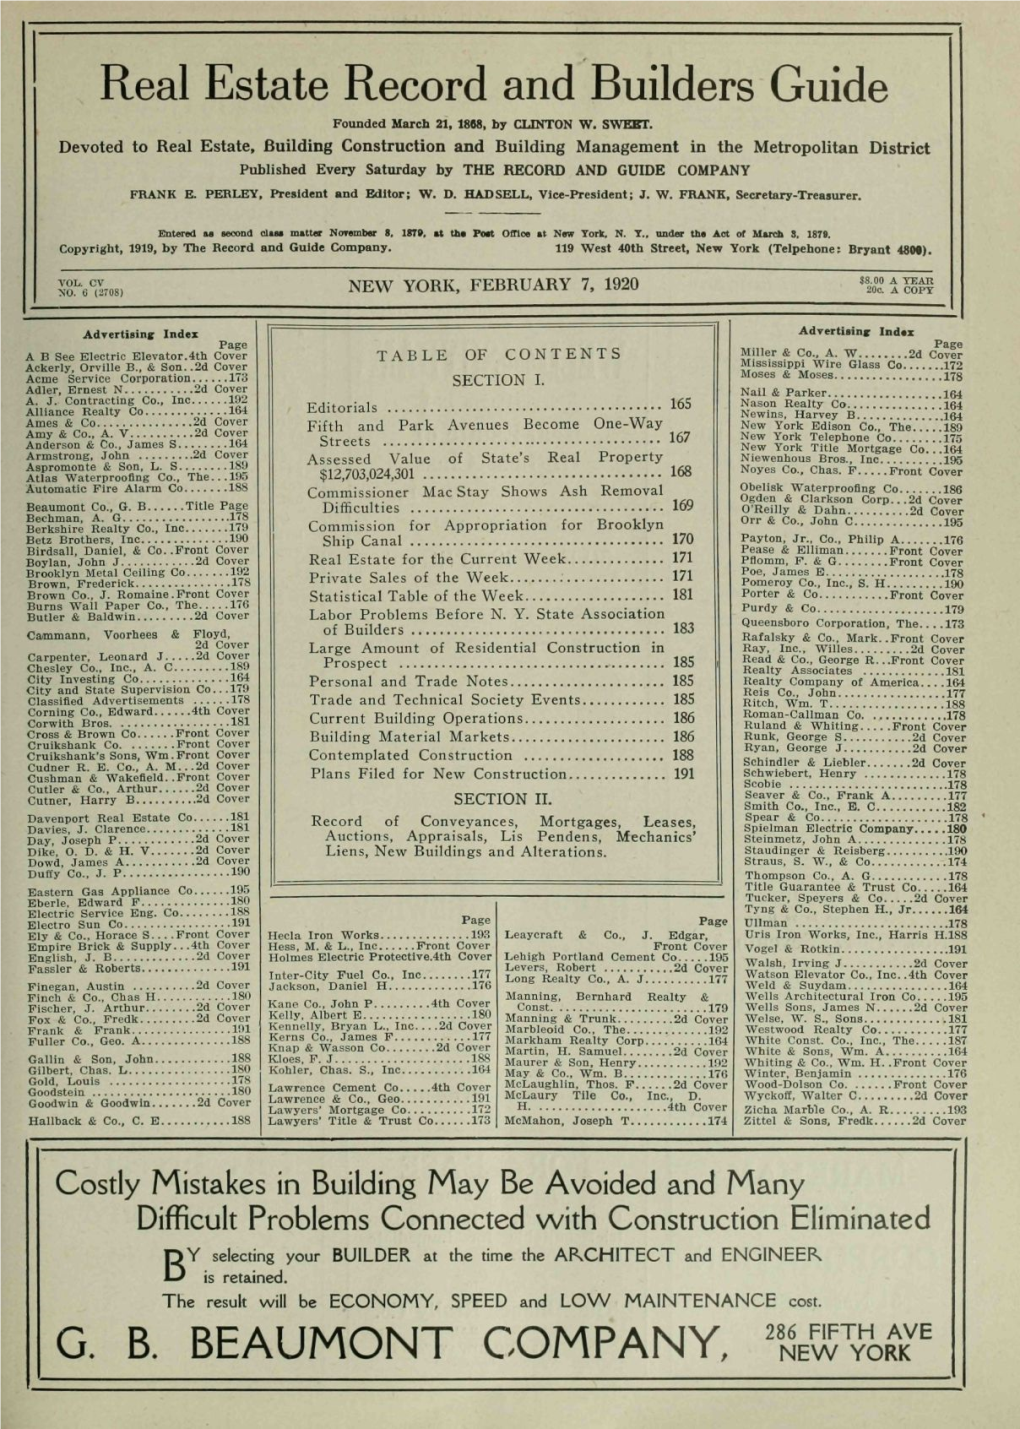 Real Estate Record and Builders Guide Founded March 21, 1888, by CLINTON W